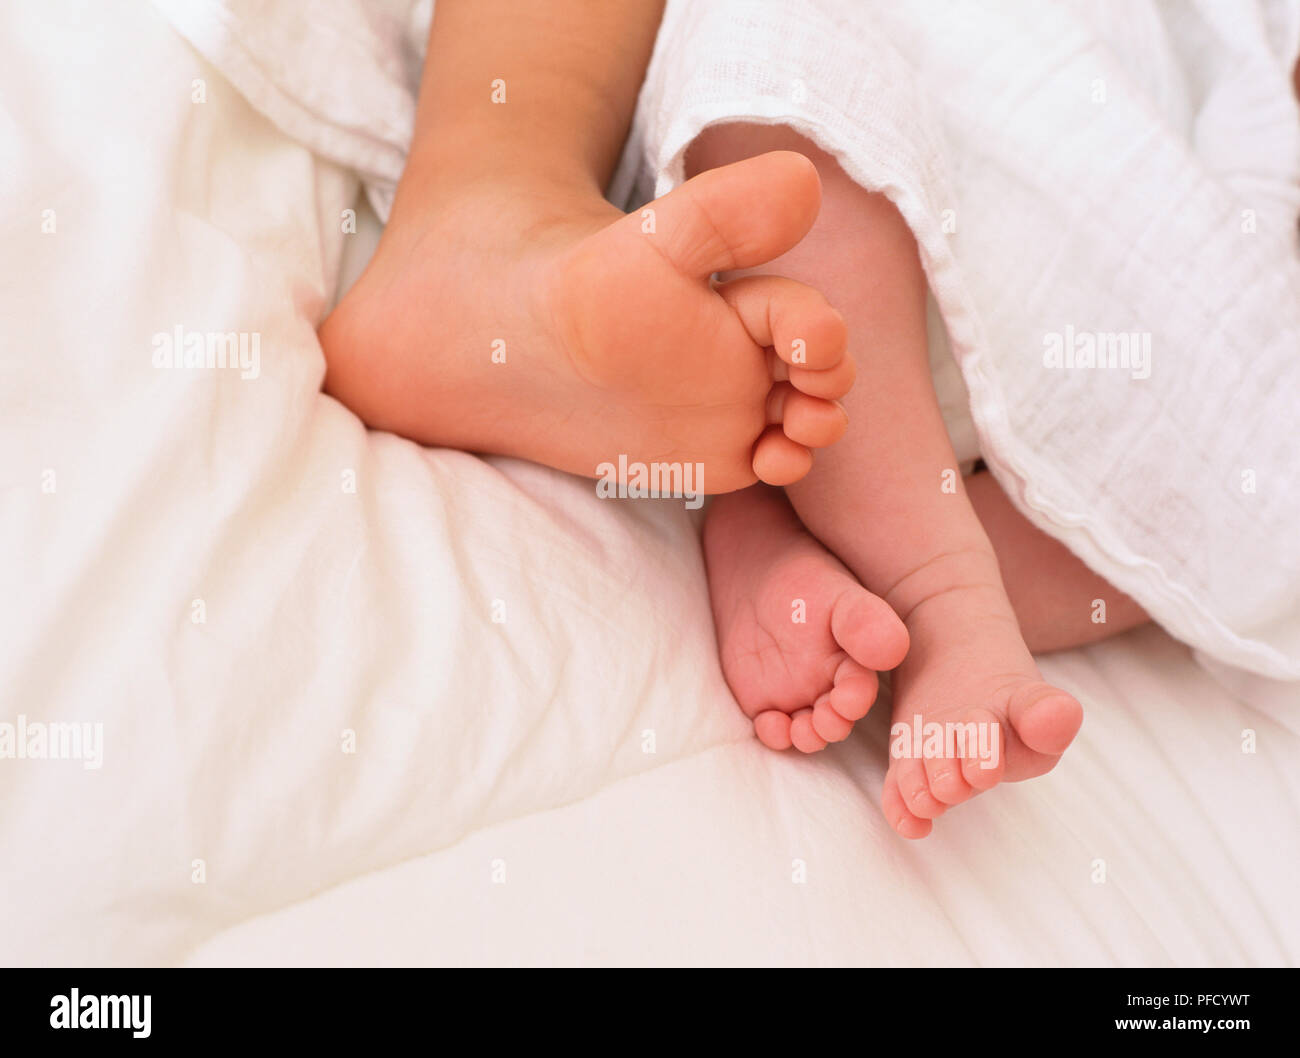 Baby feet poking out from under the covers. Stock Photo